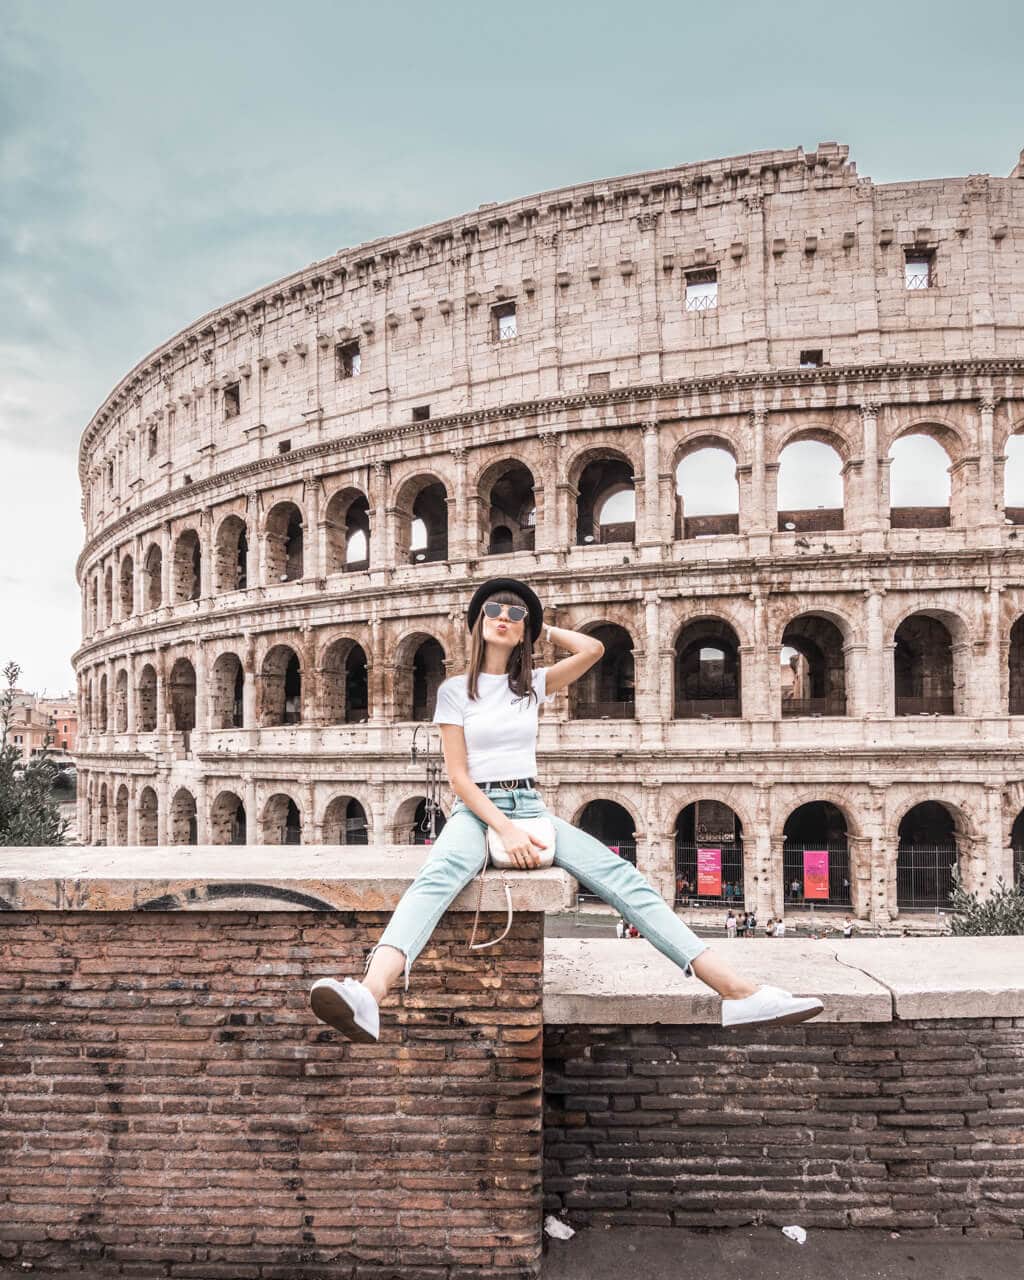 Instagram Outfits Round Up: Vacationing In Italy